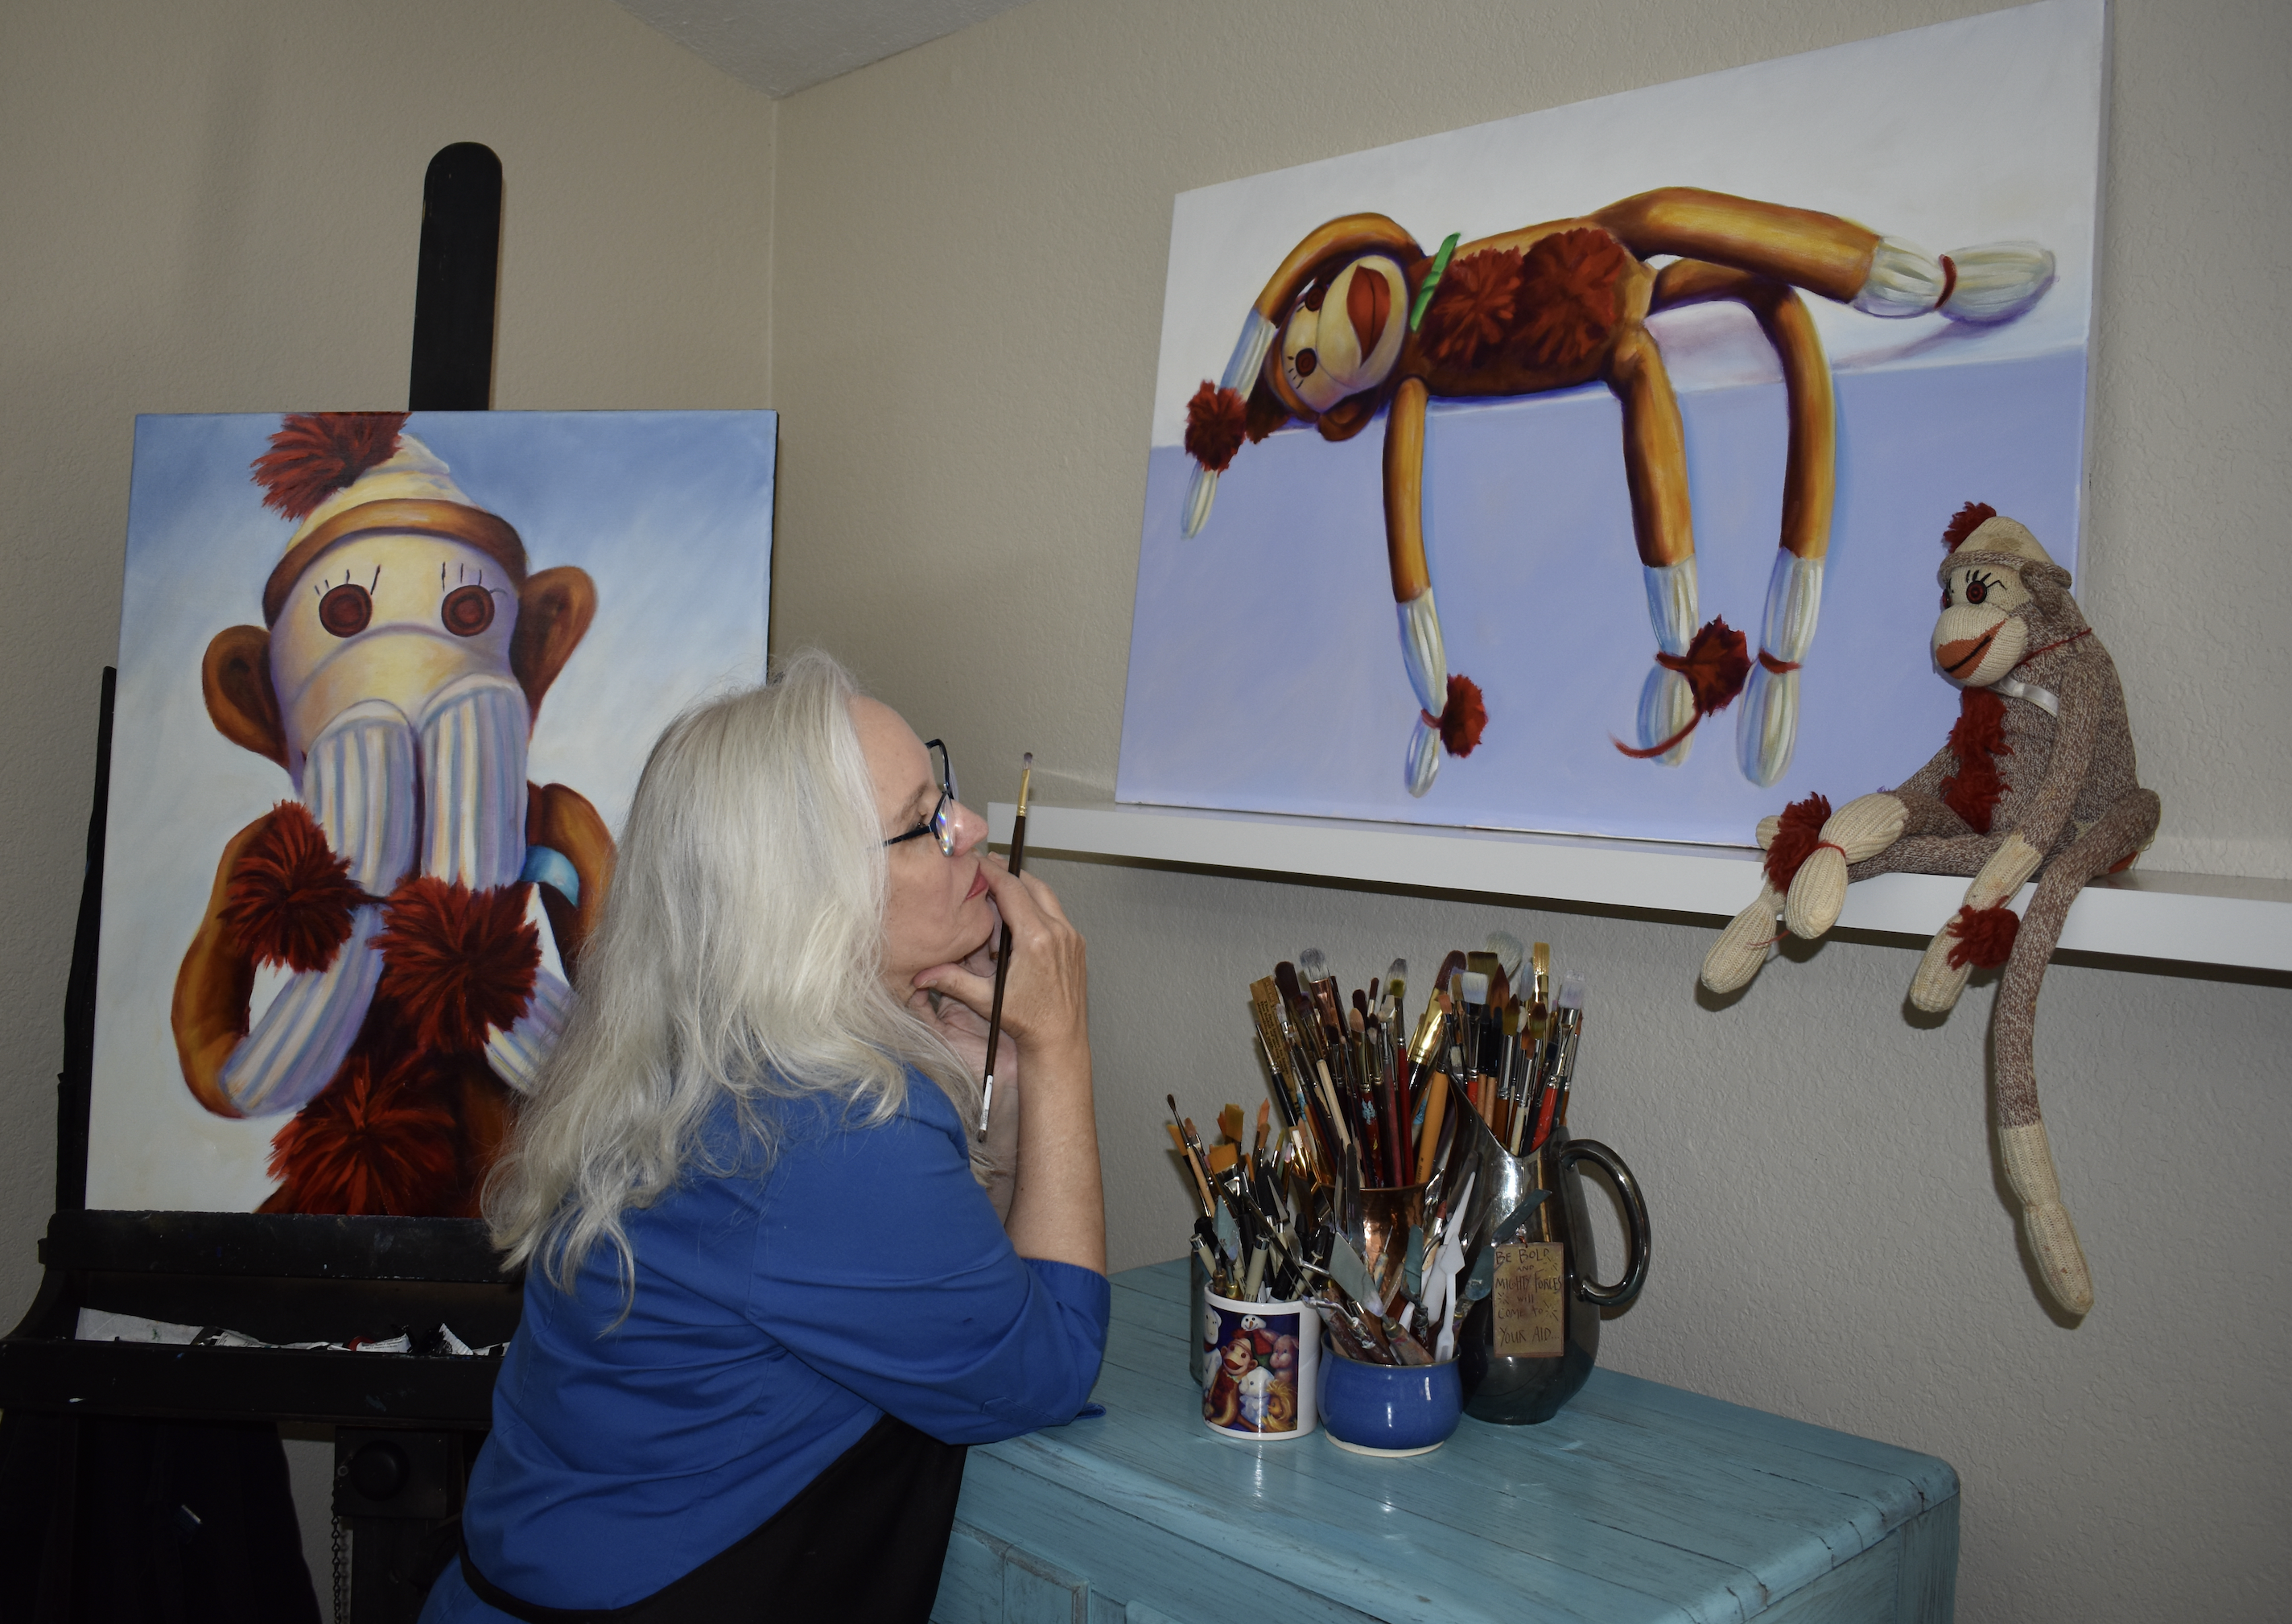 Artist with Sock Monkey Paintings